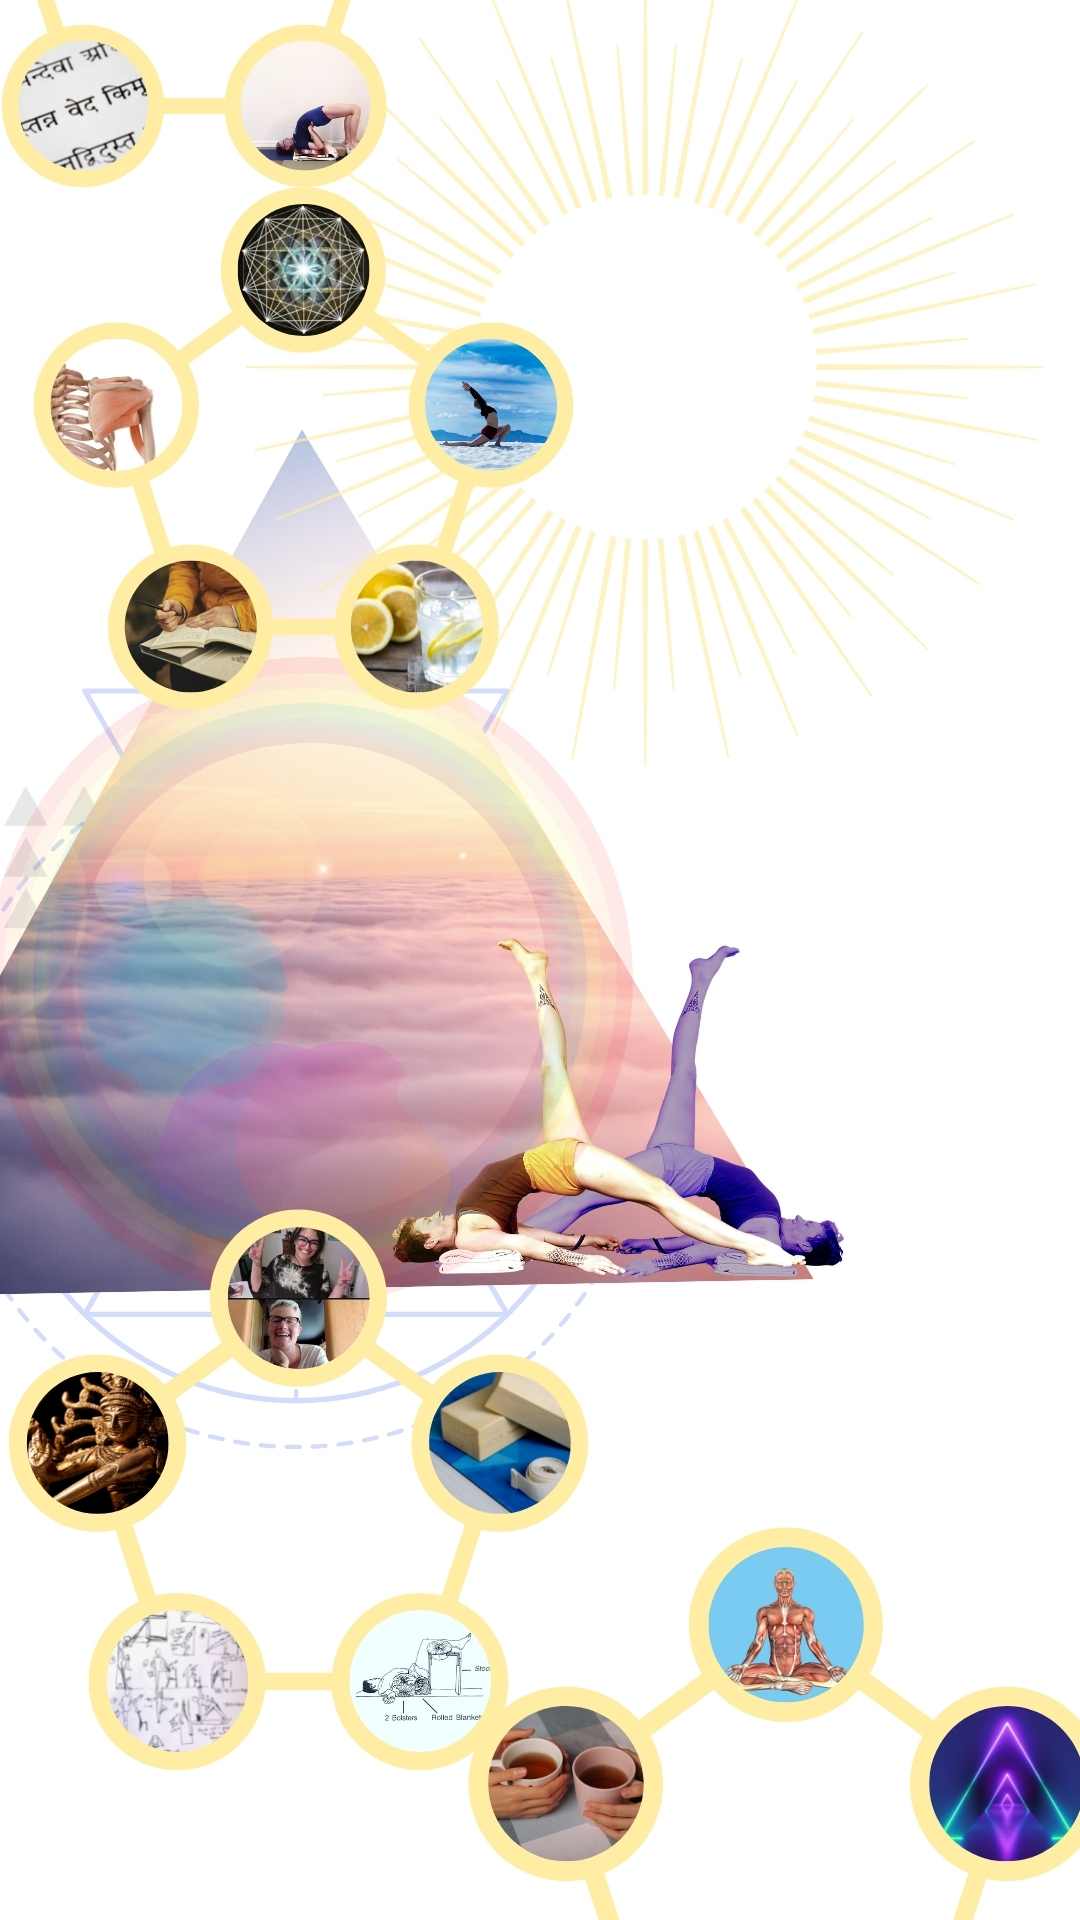 graphic illustration shows the 8 limb path of yoga Patanjali described in the Yoga Sutras